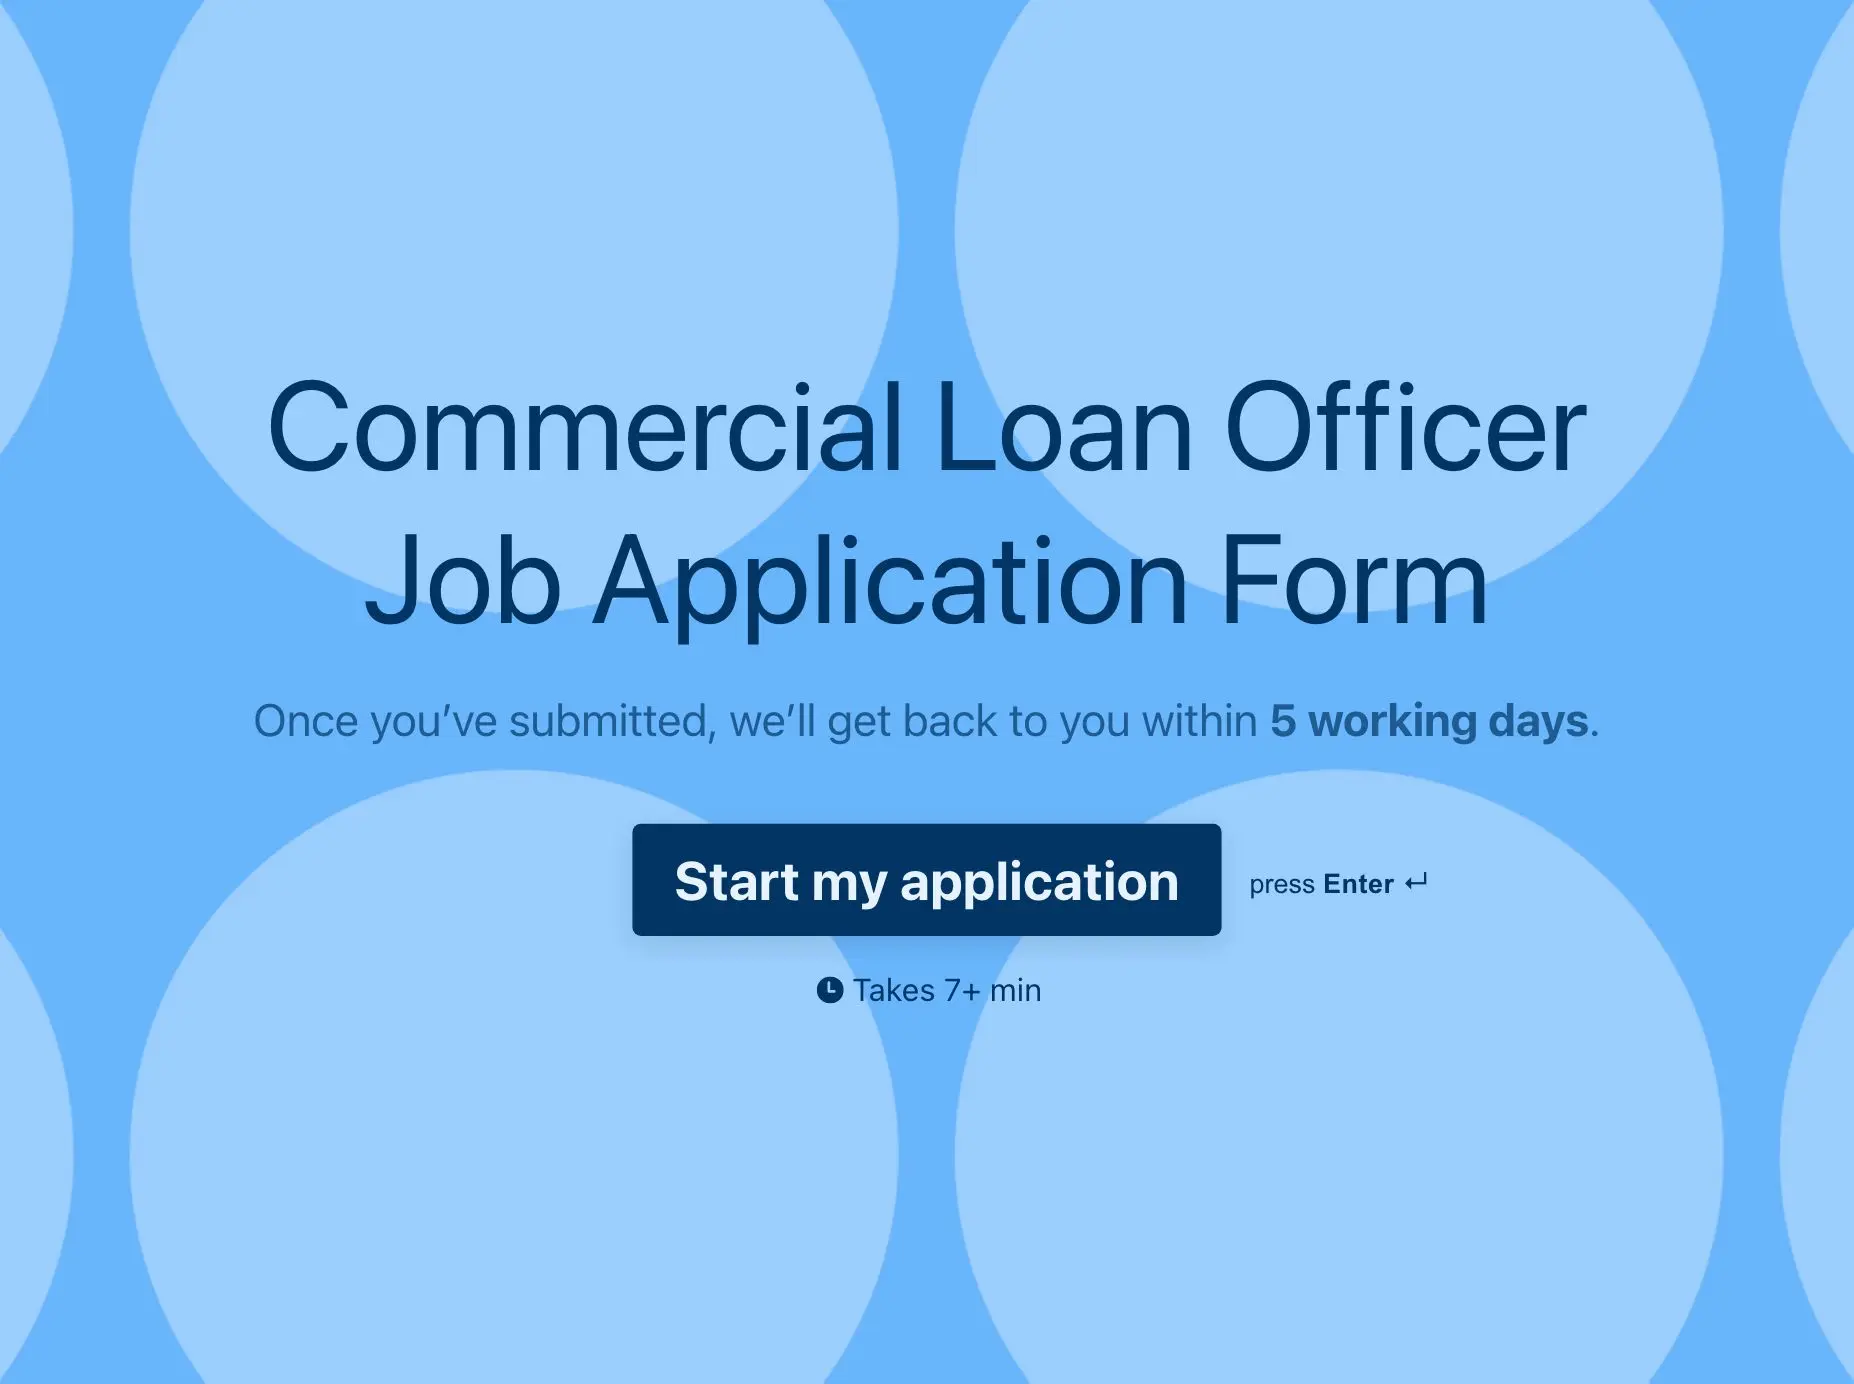 Commercial Loan Officer Job Application Form Template Hero